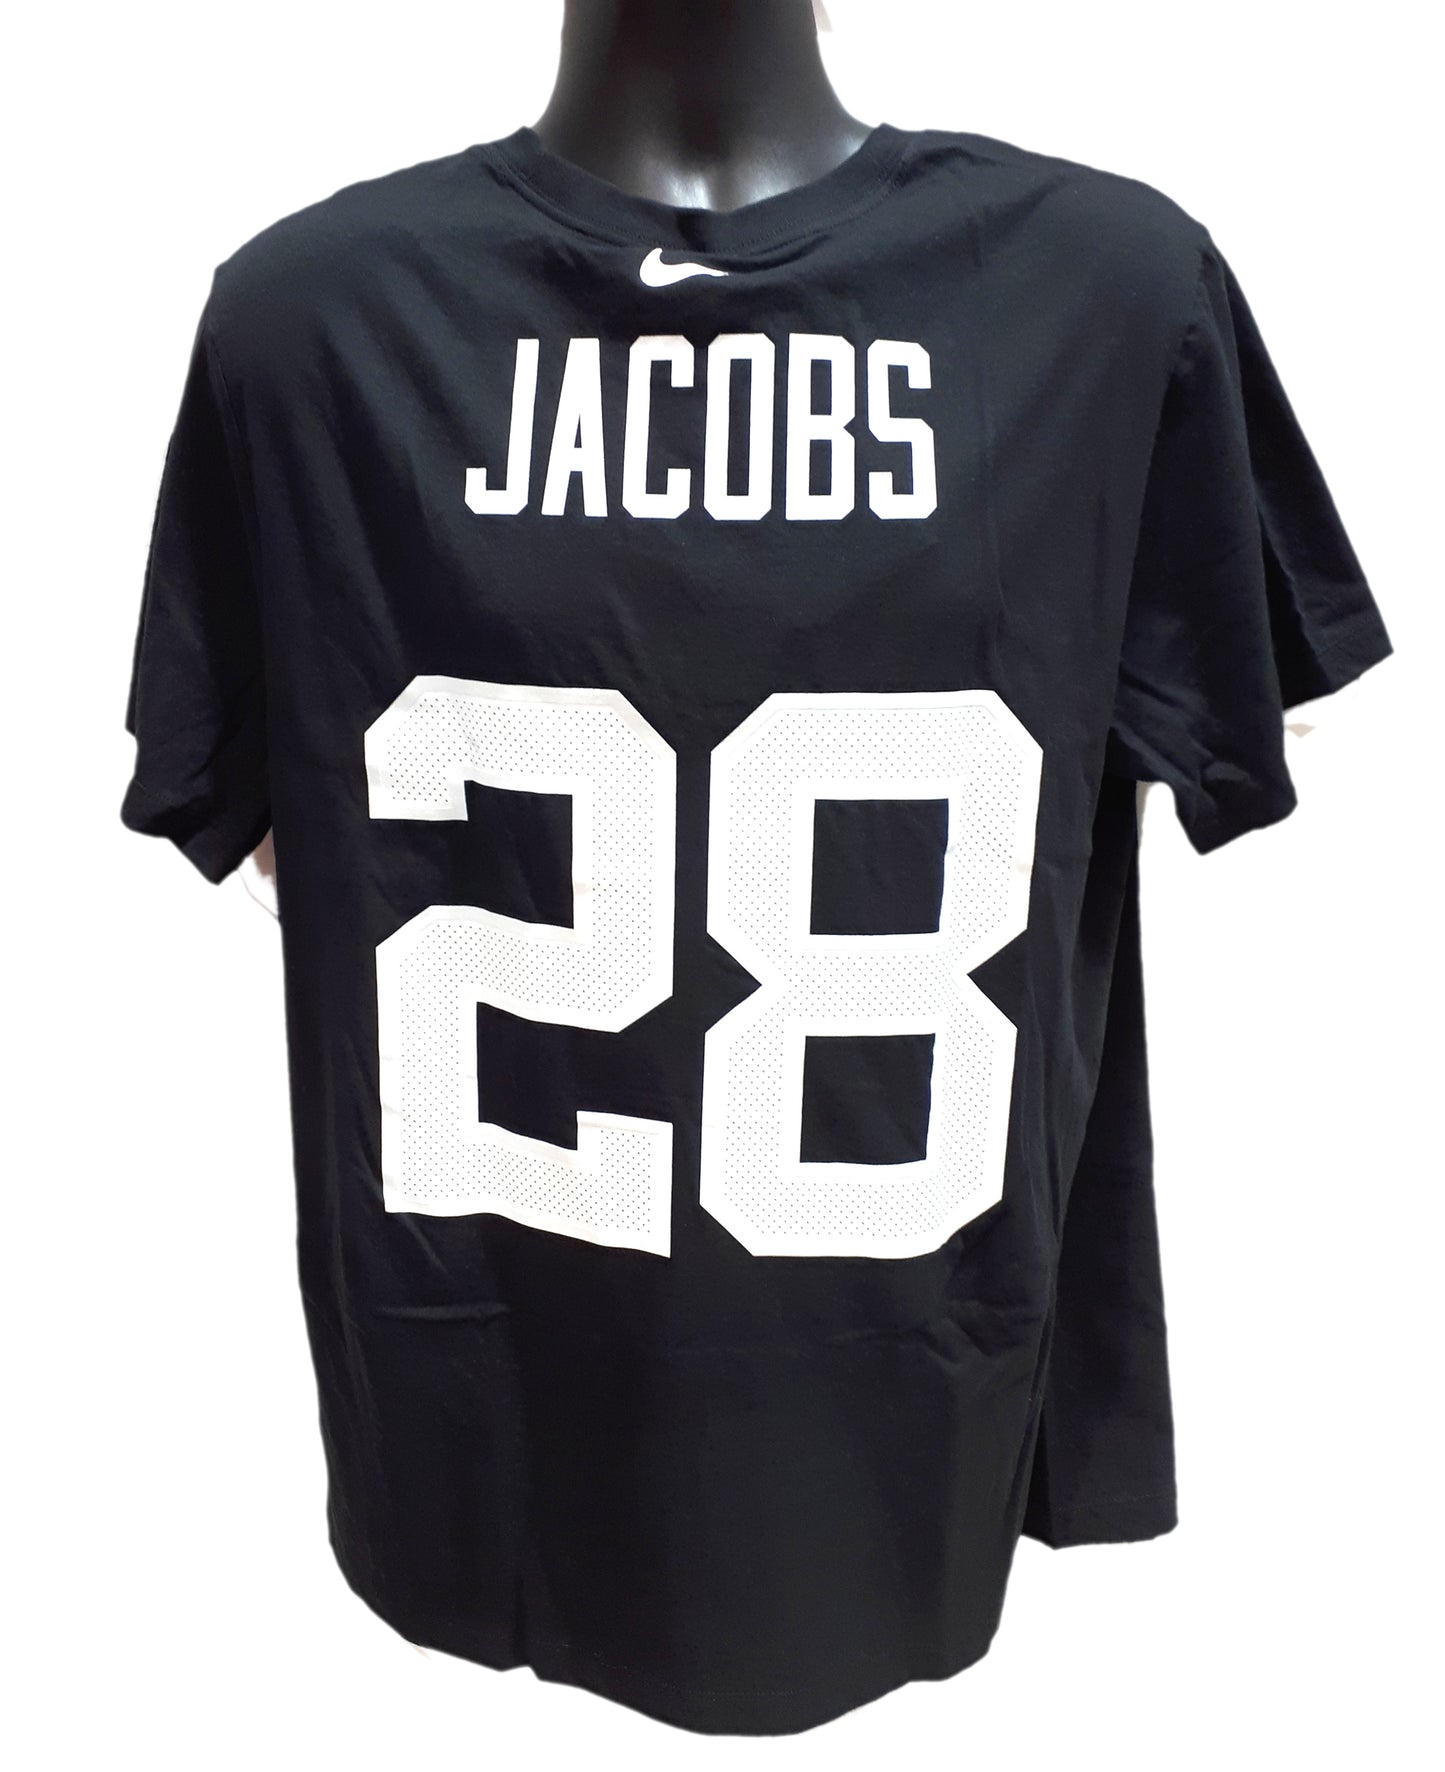 T-SHIRT NAME AND NUMBER                  J. JACOBS